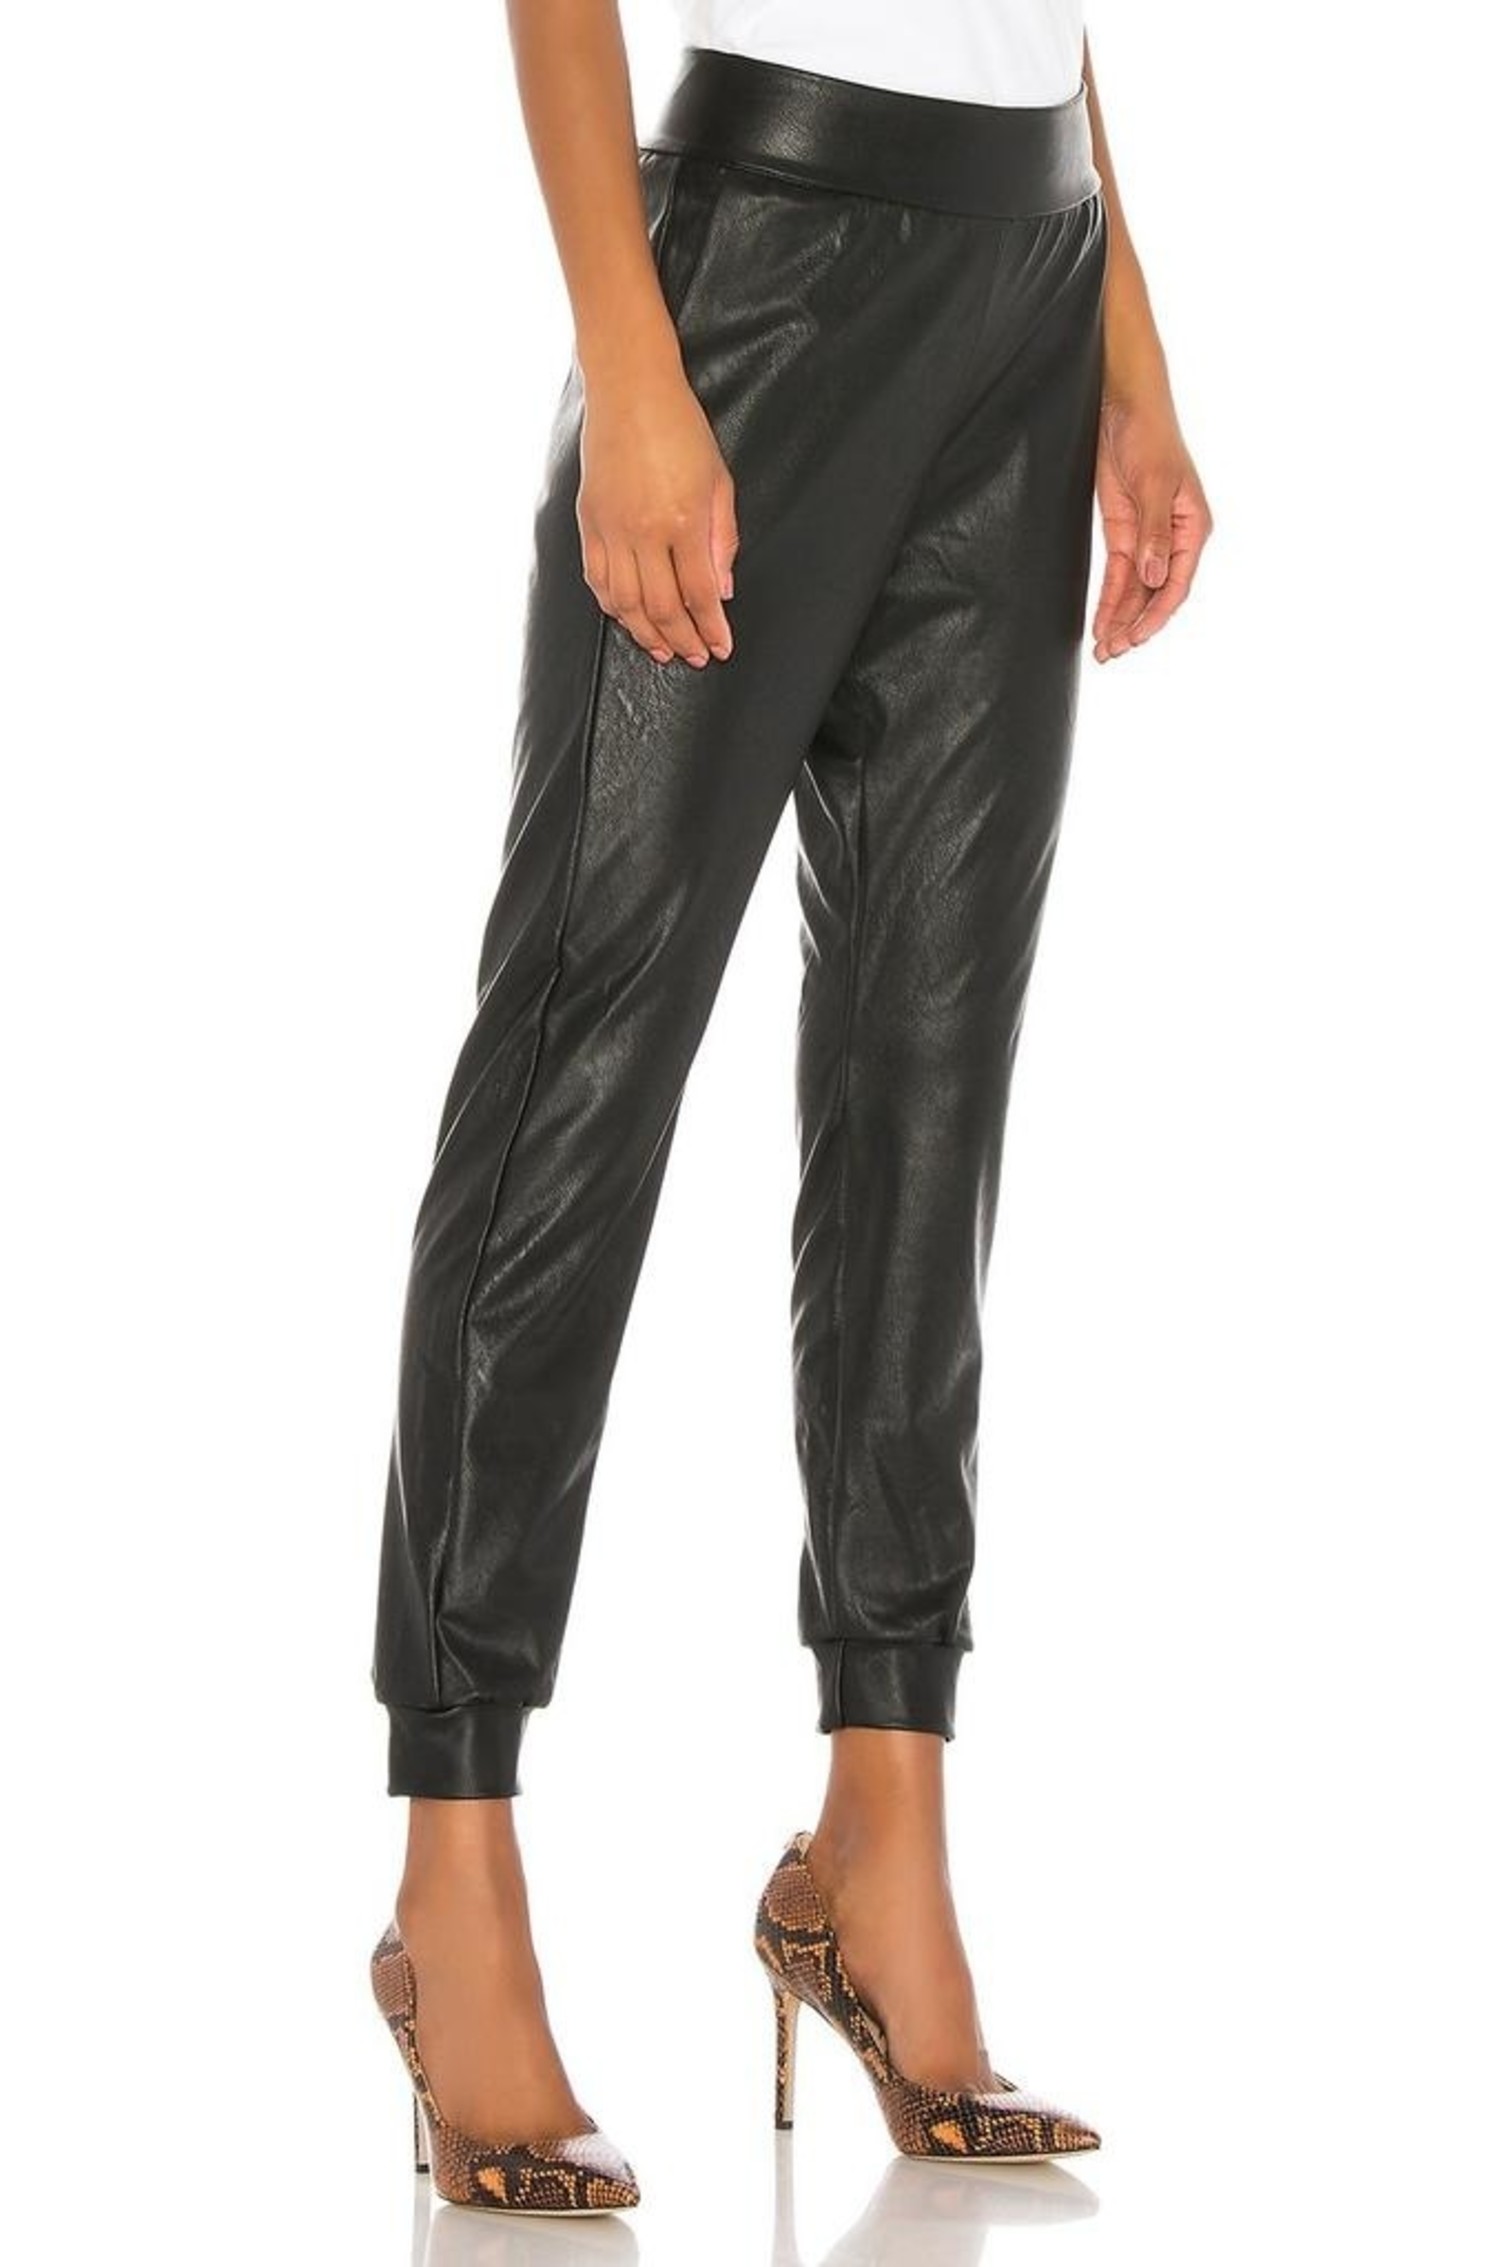 Commando Faux Leather Jogger @ Carriage Trade Shop in the Kingsway